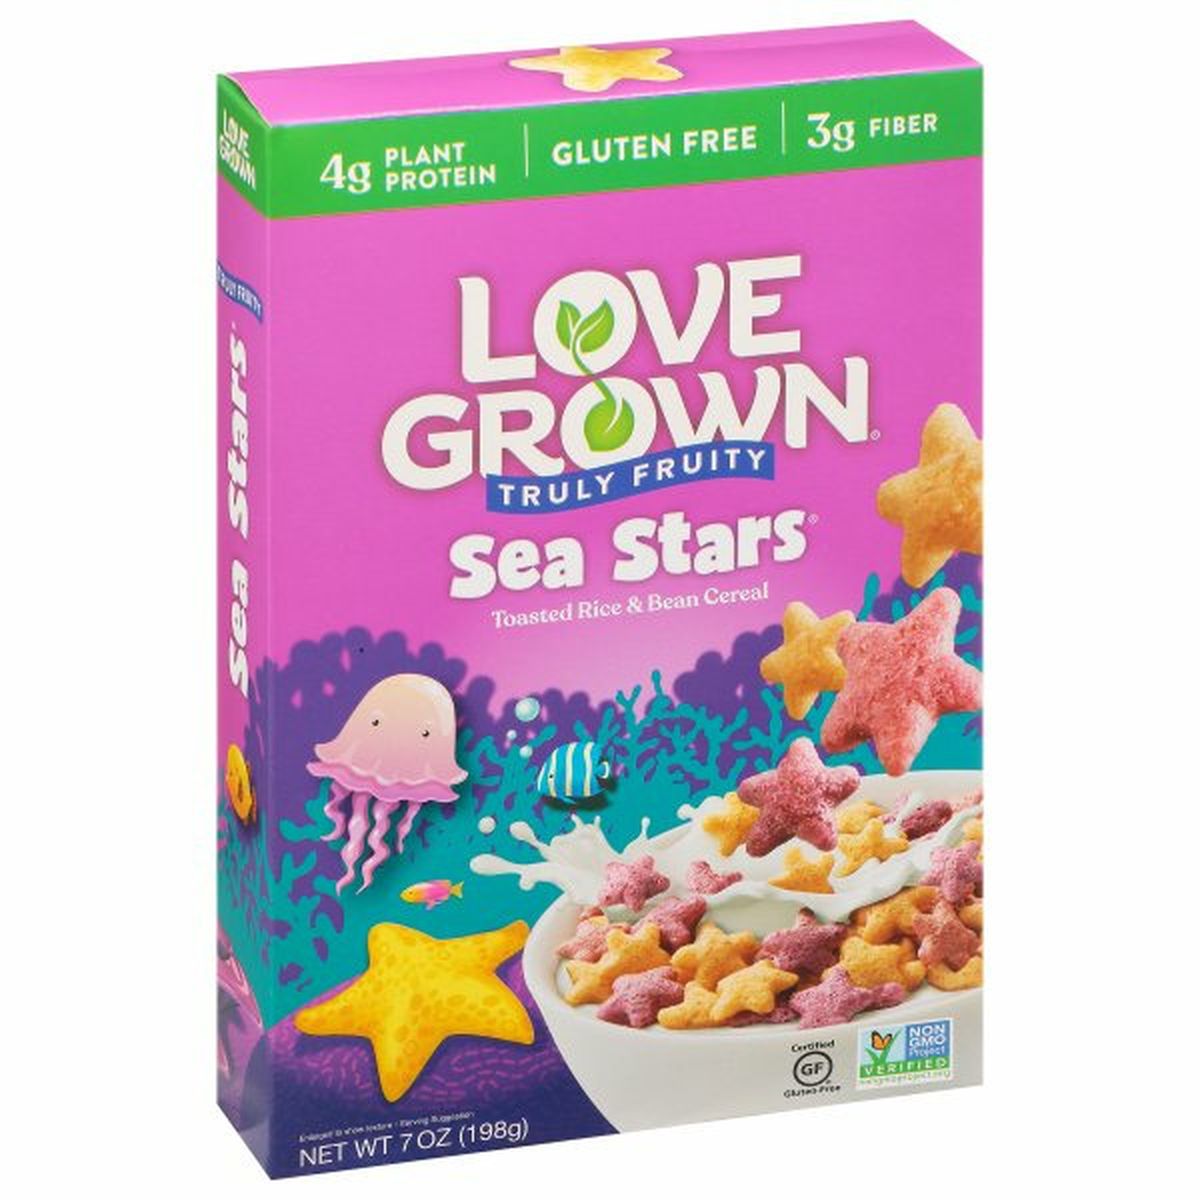 Calories in Love Grown Cereal, Truly Fruity, Sea Stars